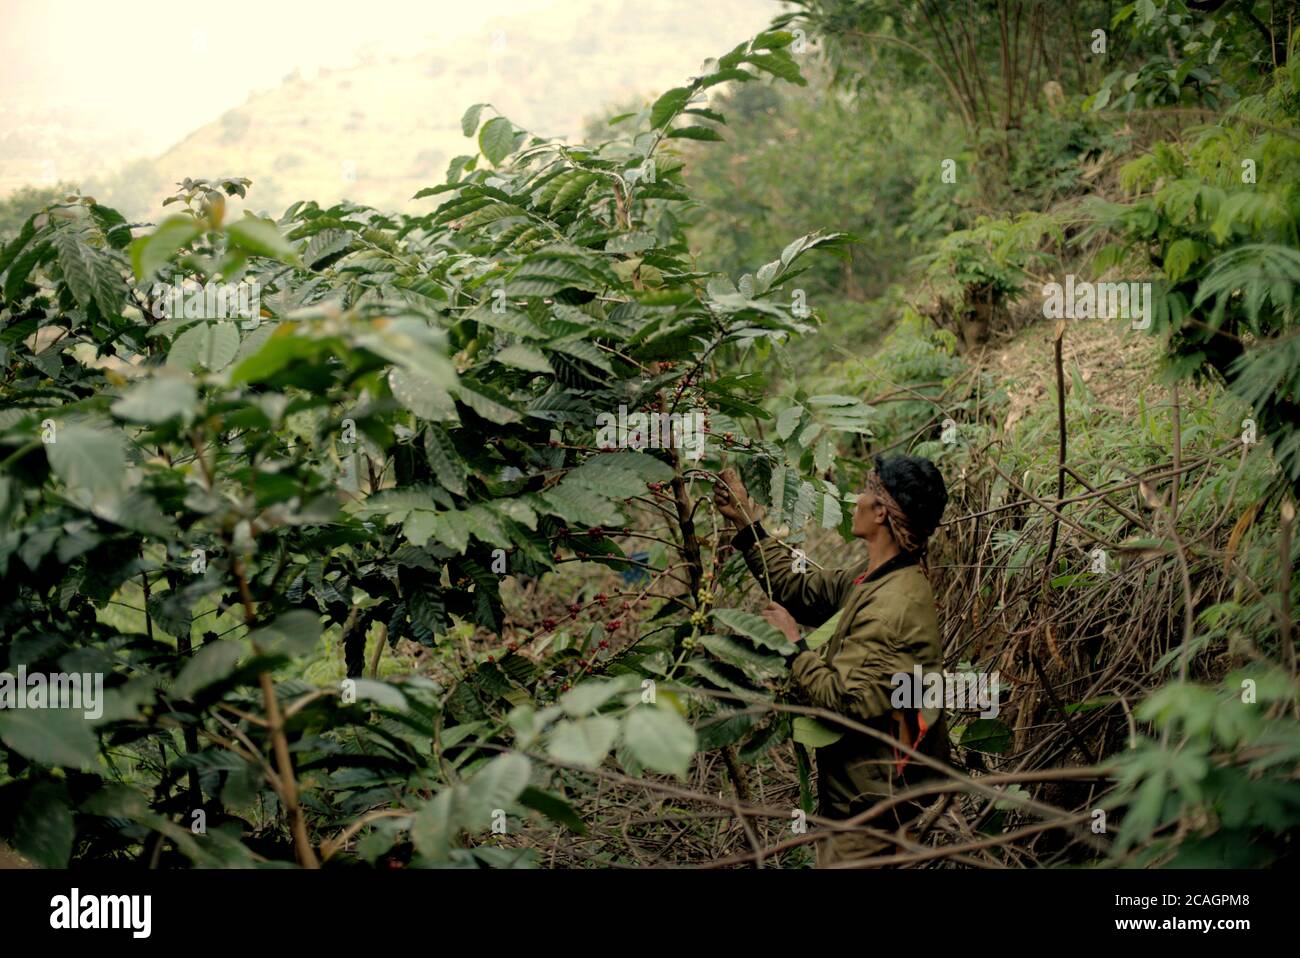 Cianjur, Indonesia. 7th Aug, 2020. Coffee farmers picking robusta coffee cherries at a hillside farm in Ciputri village, Cianjur regency, West Java, Indonesia. 'Robusta is priced lower compared with arabica variety, but it's time now to pick robusta,' says Dudu Duroni (pictured), as he is working with his wife. Farmers in the area form a local farmers organization, besides establishing a long-term contract with a coffee processing industry to ensure they will get stable selling prices for both robusta and arabica cherries. 'It helps whenever coffee price is going down outside,' says Dudu. Stock Photo